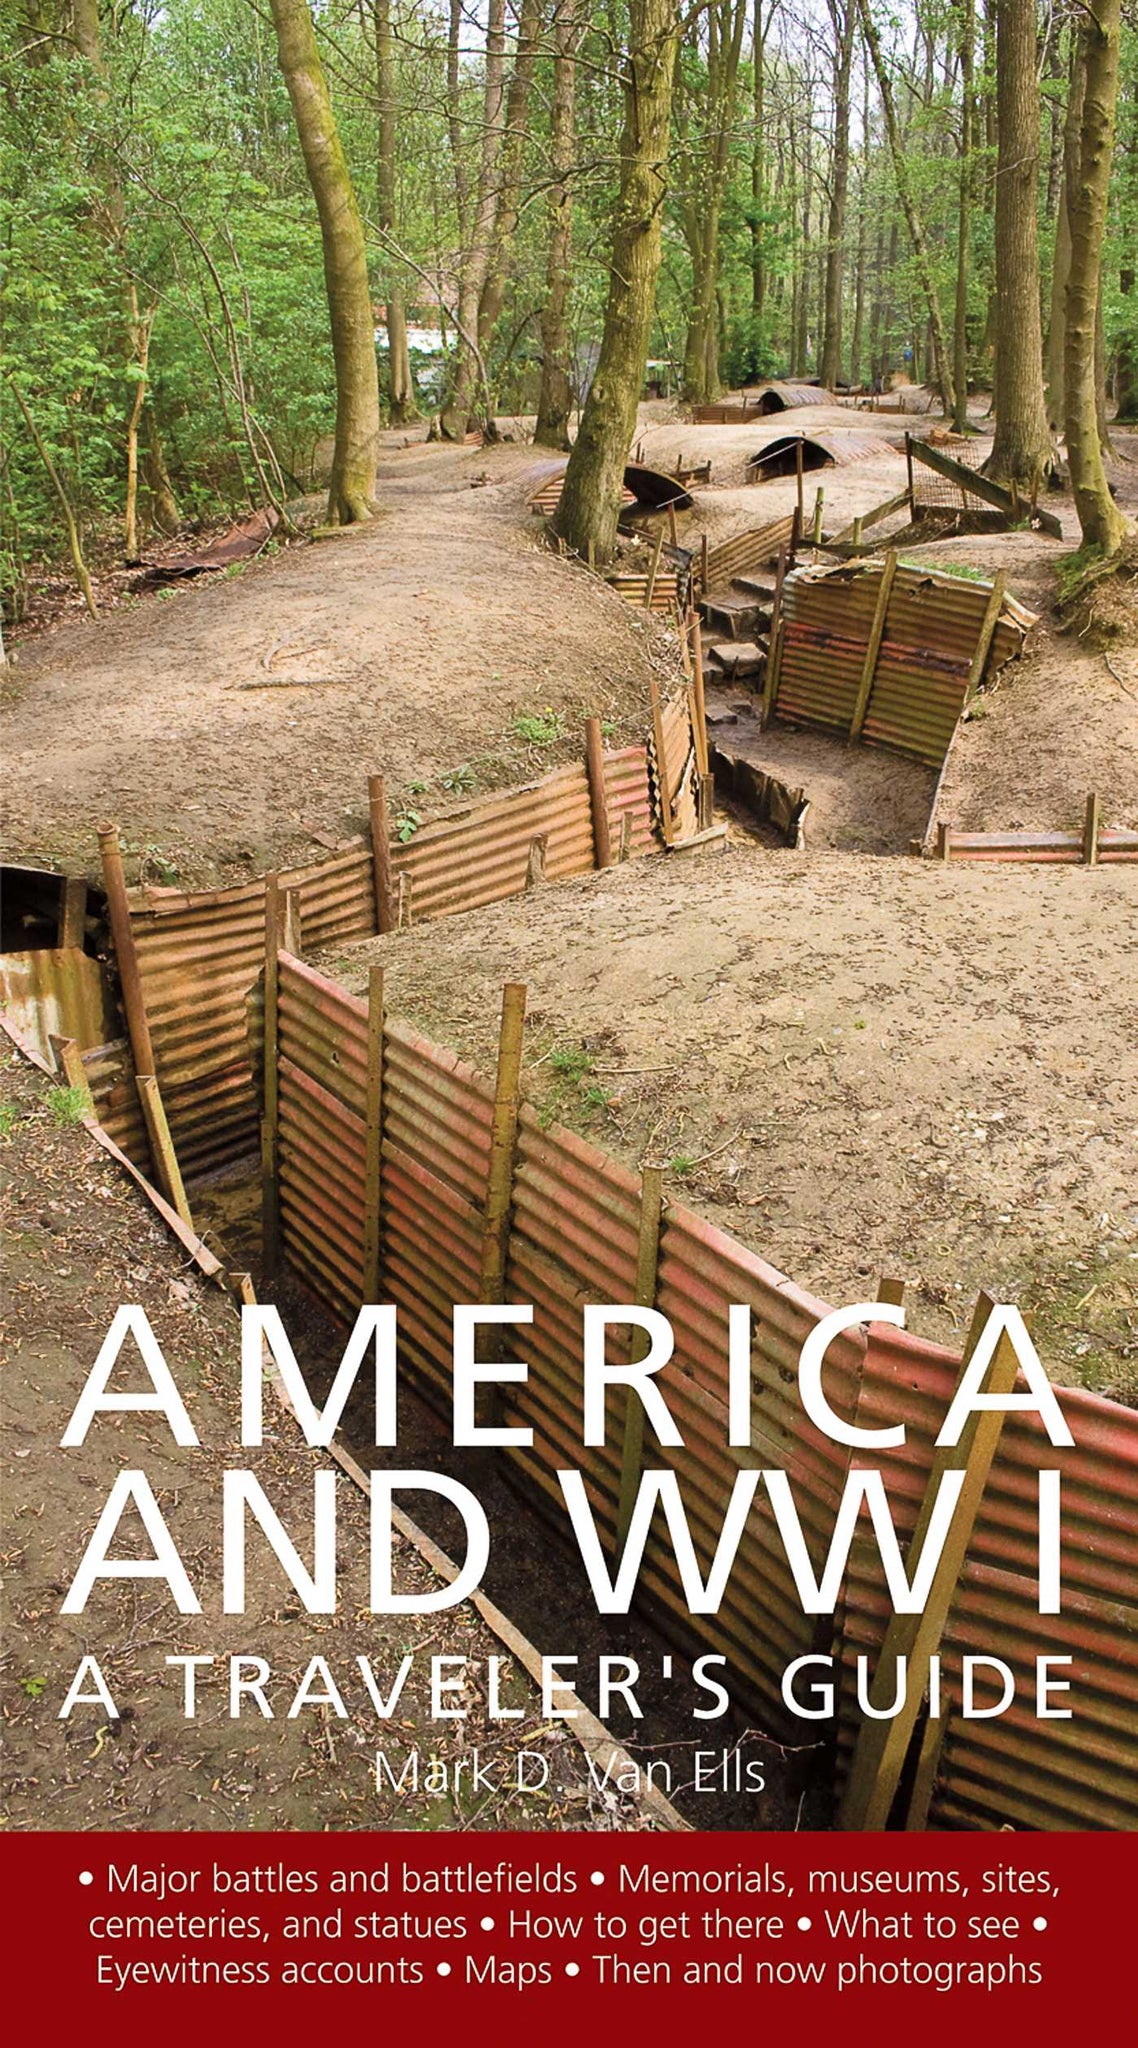 America and World War I : A Traveler's Guide